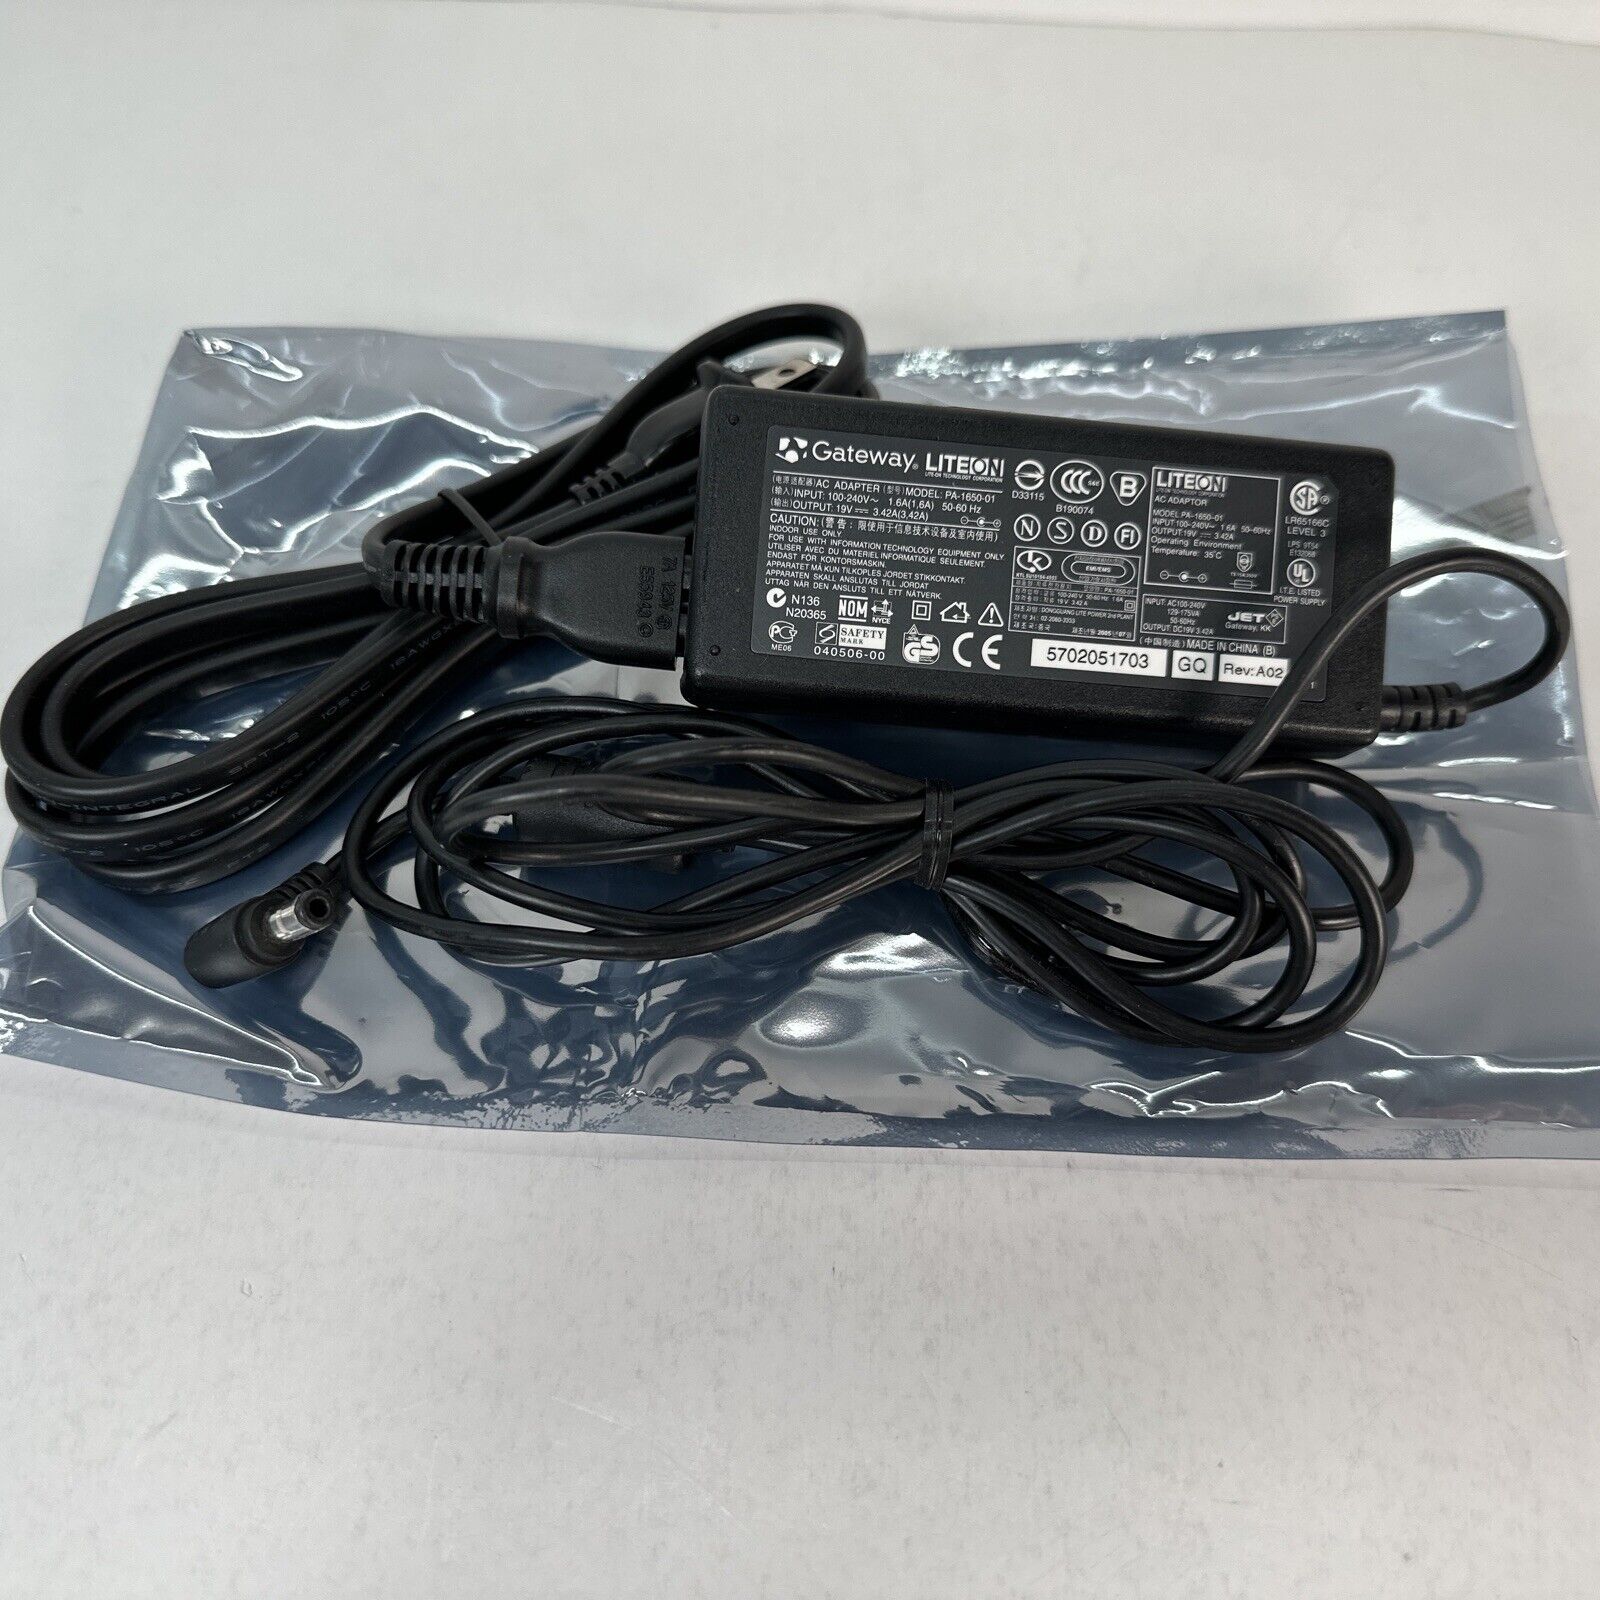 Gateway Liteon Laptop Charger AC Adapter Power Supply PA-1650-01 19V 3.42A 65W